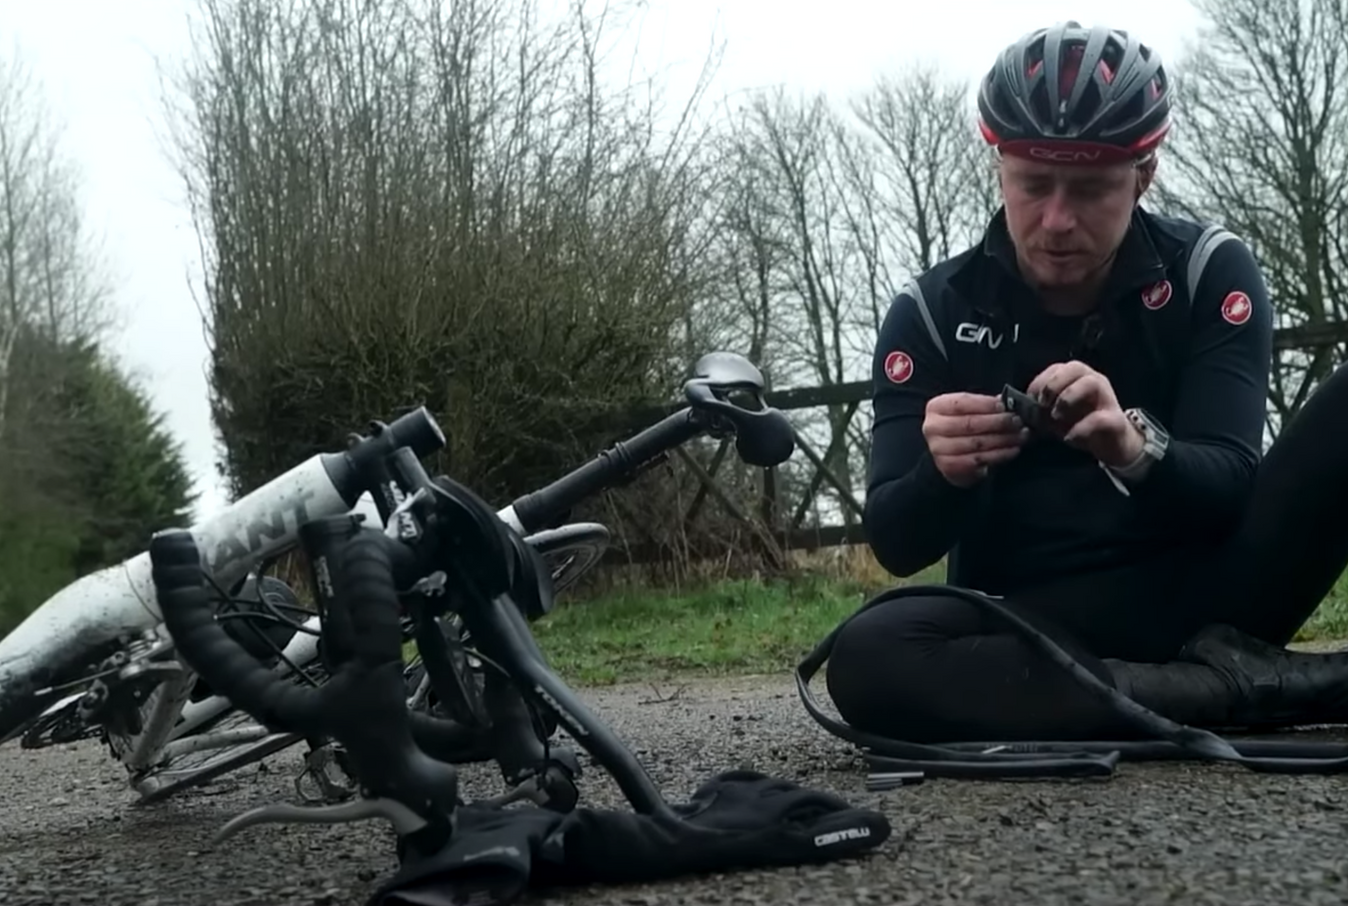 It's easier and less messy to fix an inner tube puncture